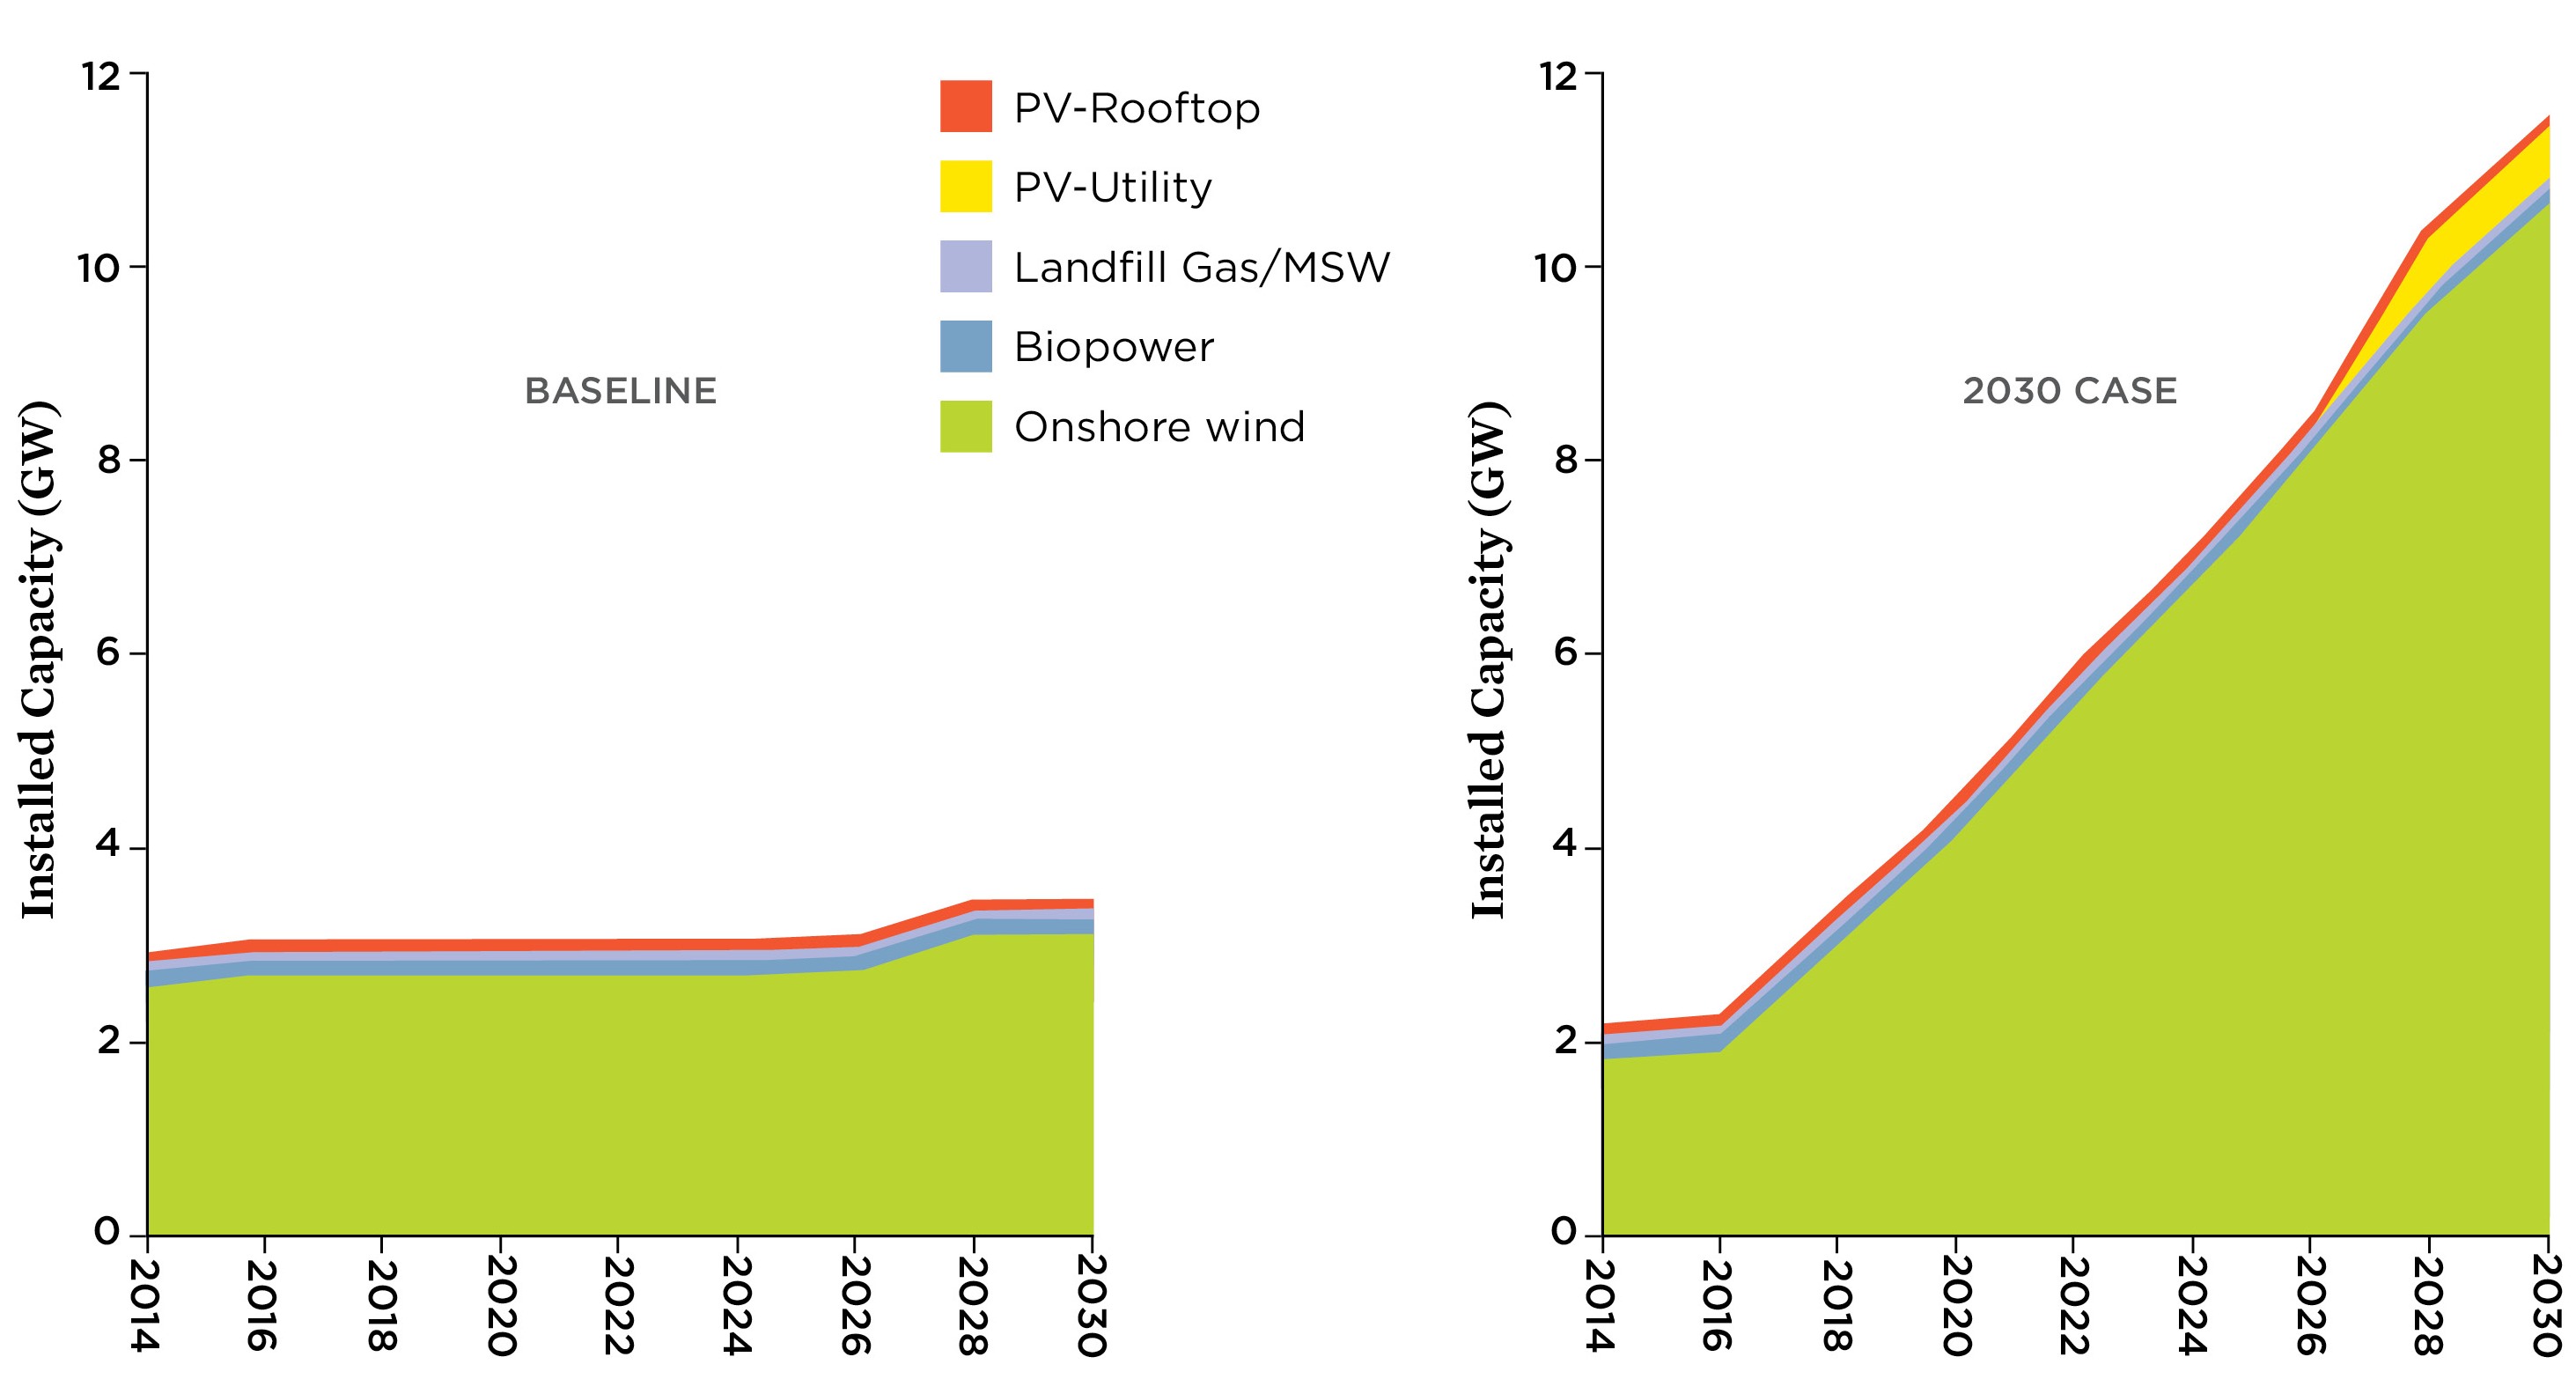 Without policy support beyond 2015, renewable energy development in Michigan remains largely stagnant from 2014 to 2030. However, under a 32.5 percent by 2030 RES, the deployment of renewable energy in Michigan averages more than 550 MW of new renewable energy per year.